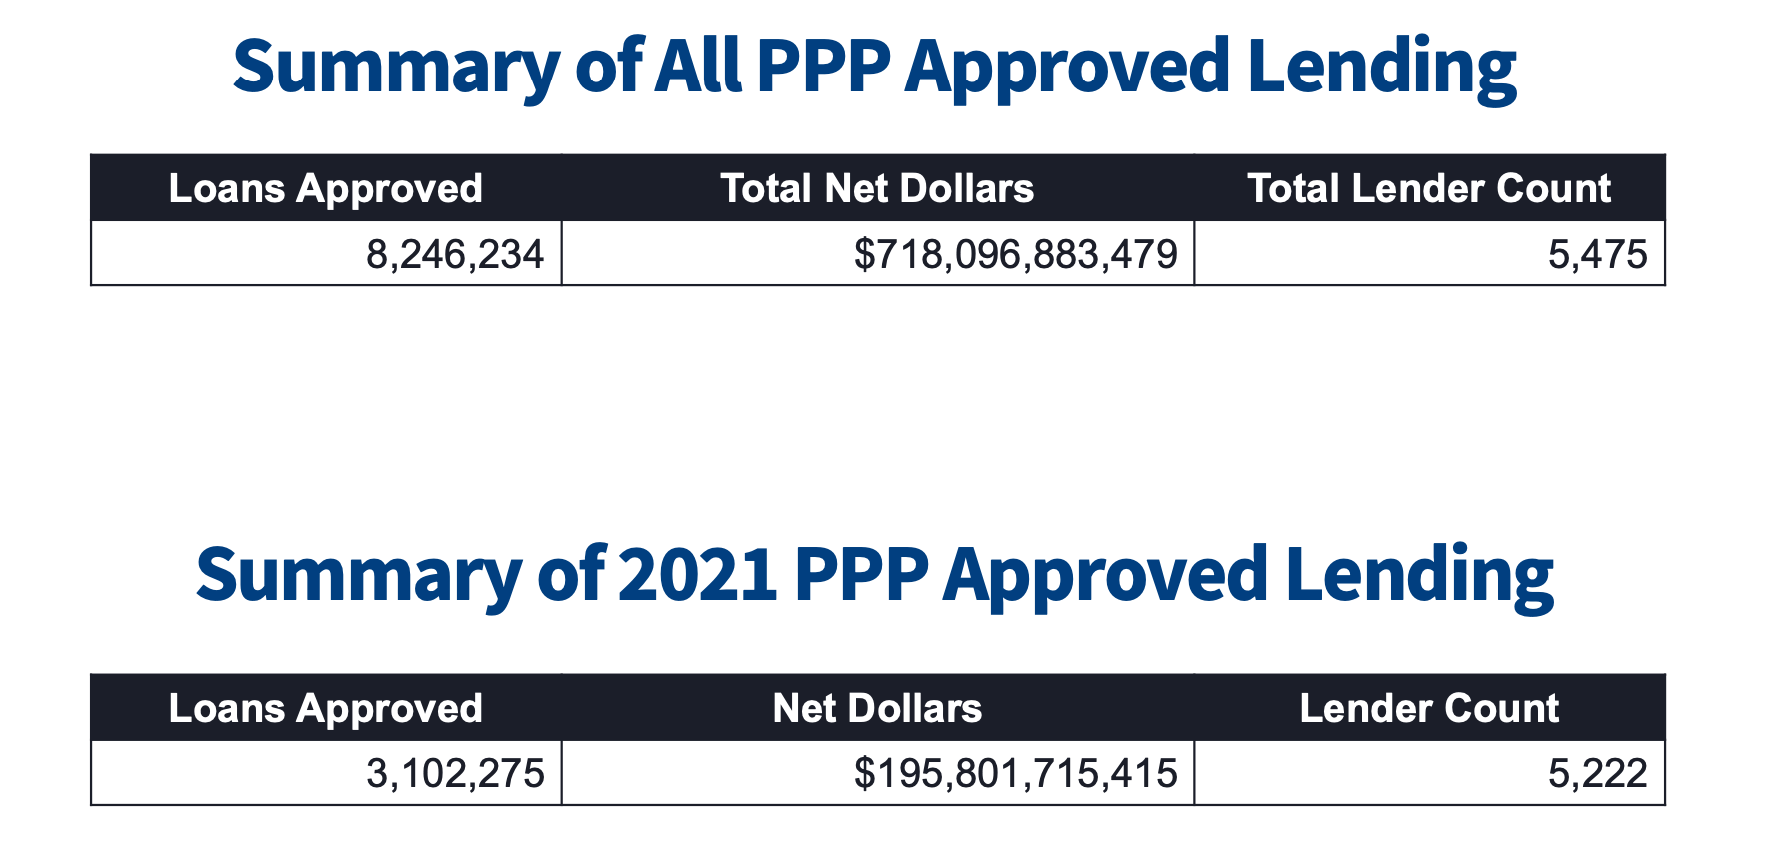 https://static.helloskip.com/blog/2021/03/Summary-of-PPP-Approved-Lending-through-March-25-2021.png